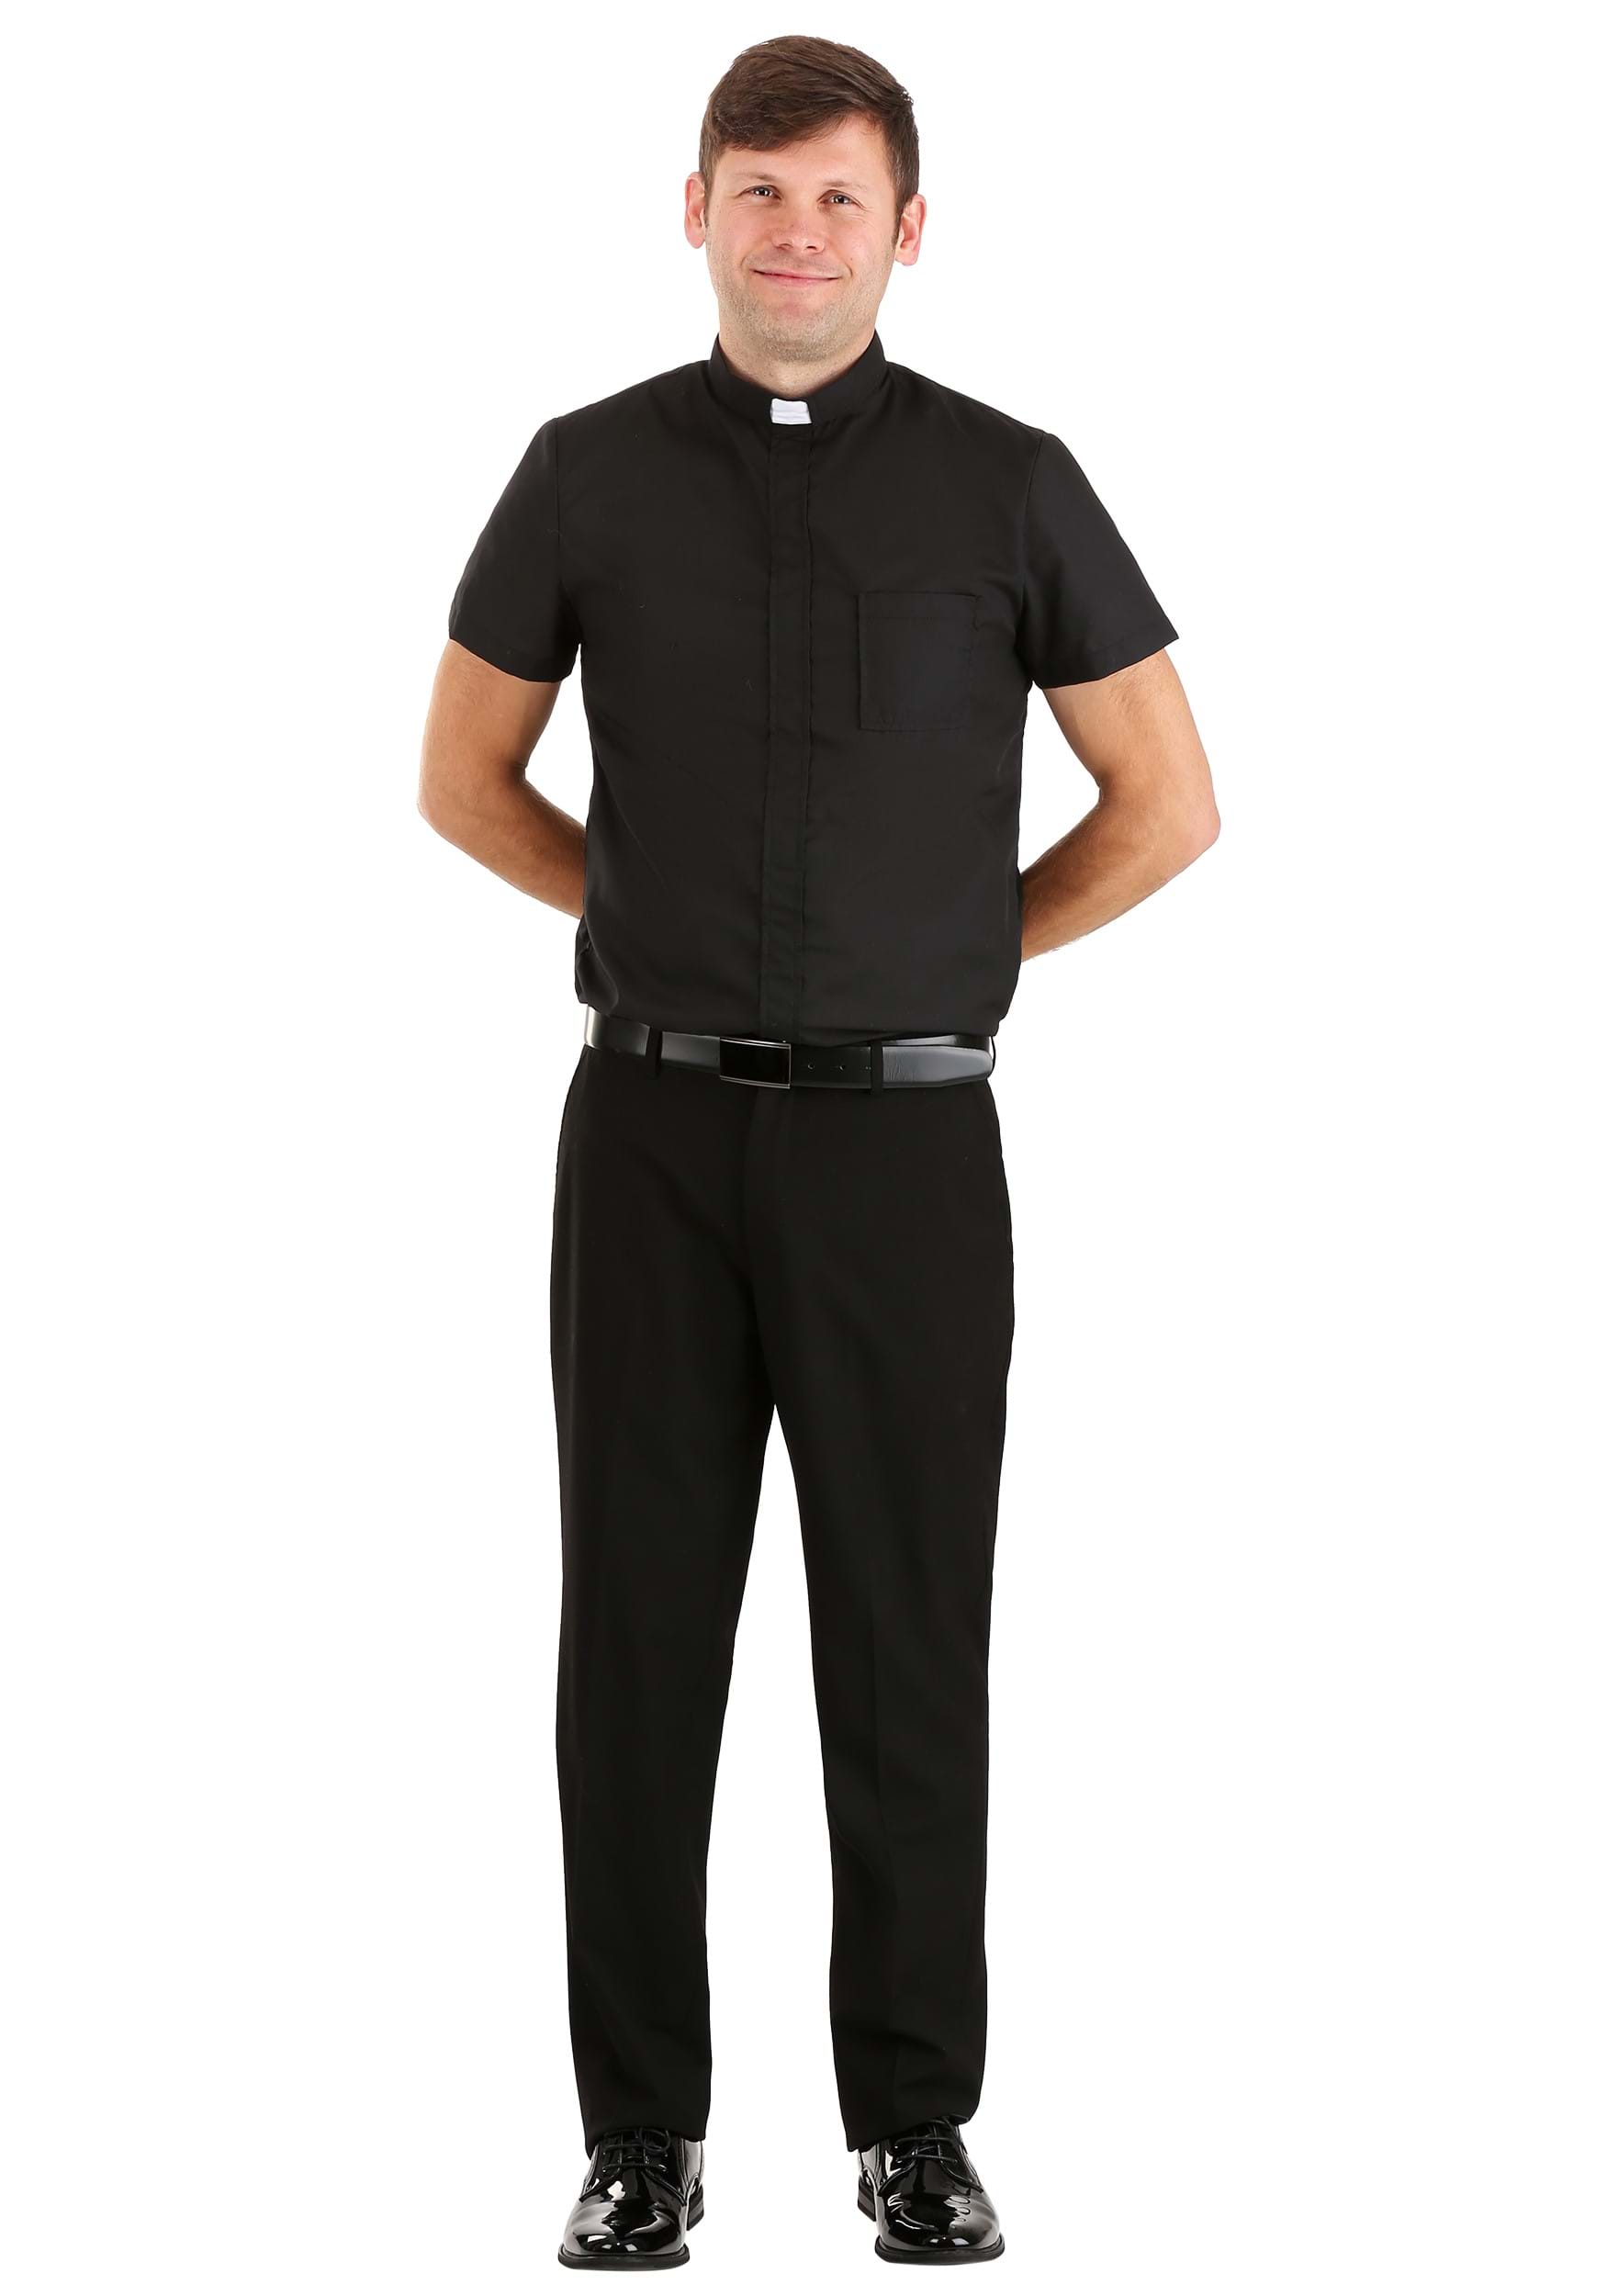 Classic Priest Costume for Adult